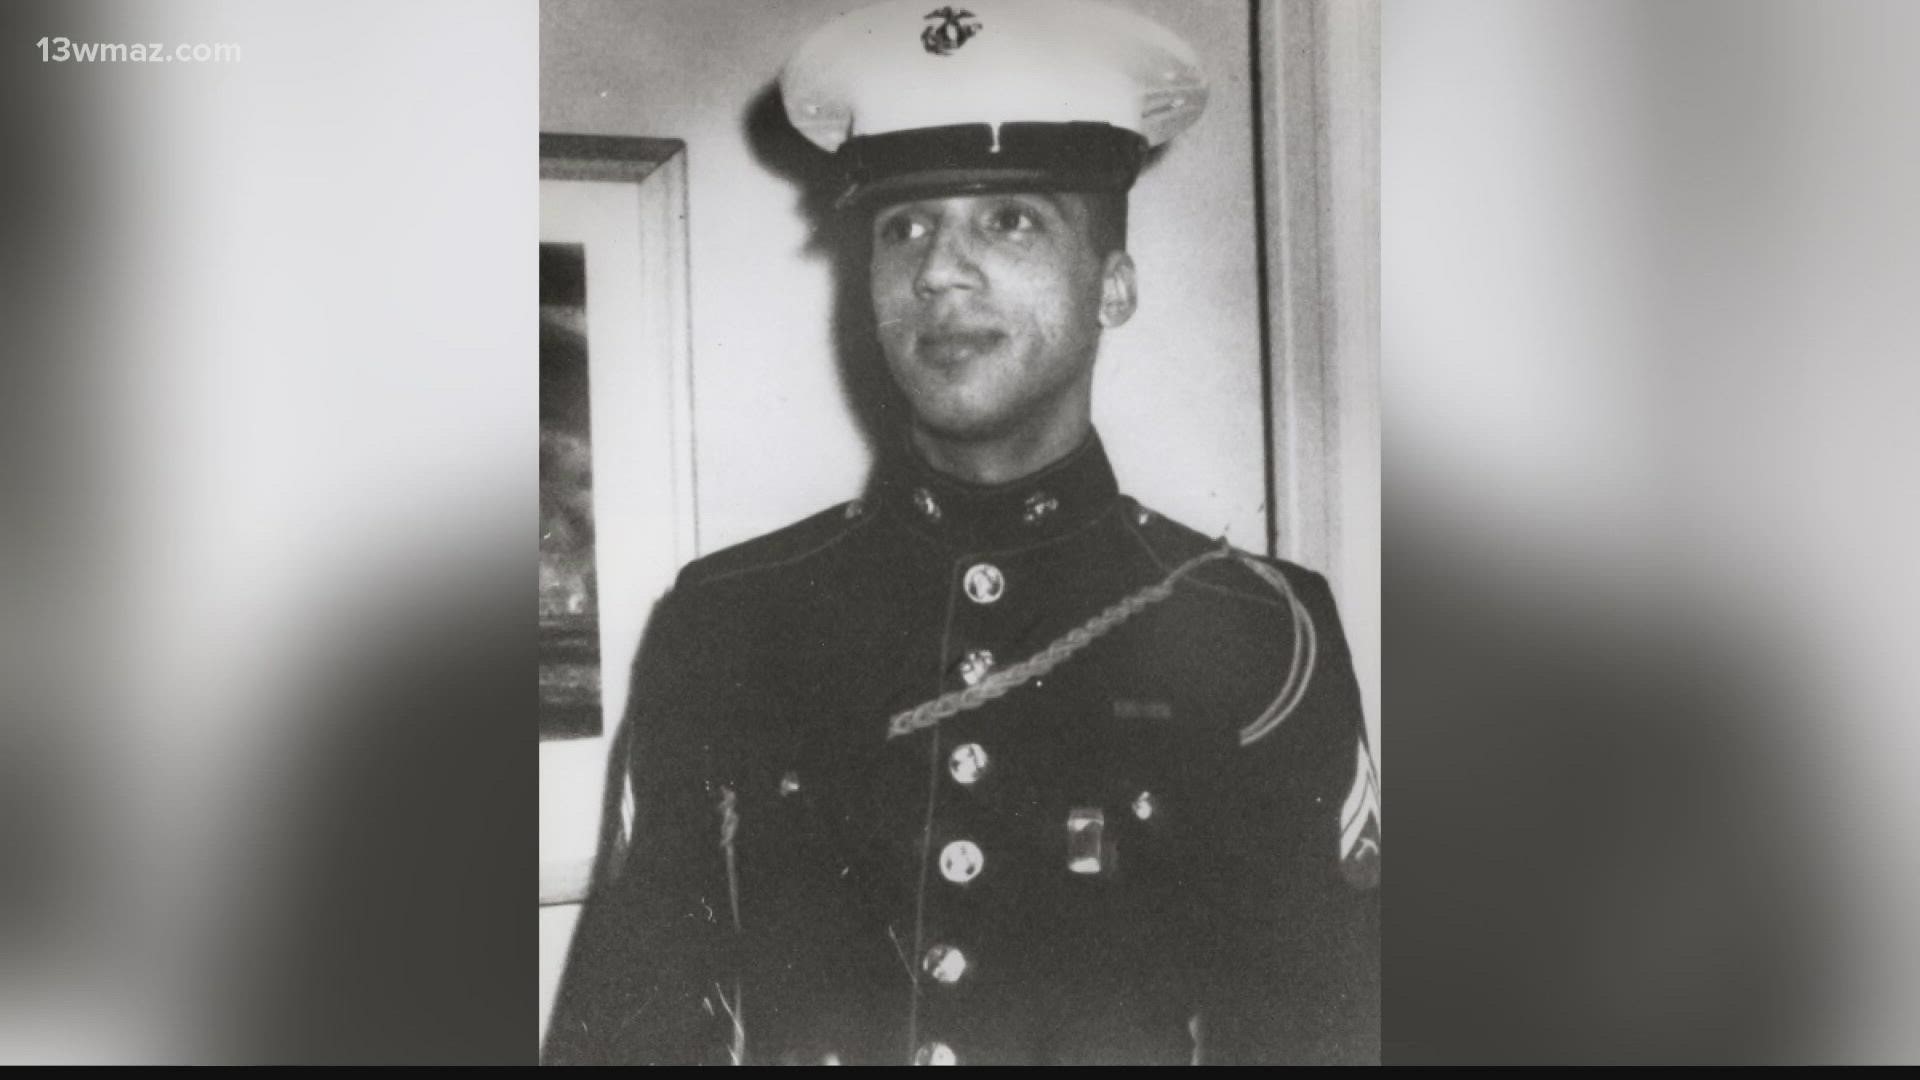 Sgt. Rodney Davis was awarded the Medal of Honor for his heroism during the Vietnam War in 1967, when he threw himself on a grenade to save his comrades.